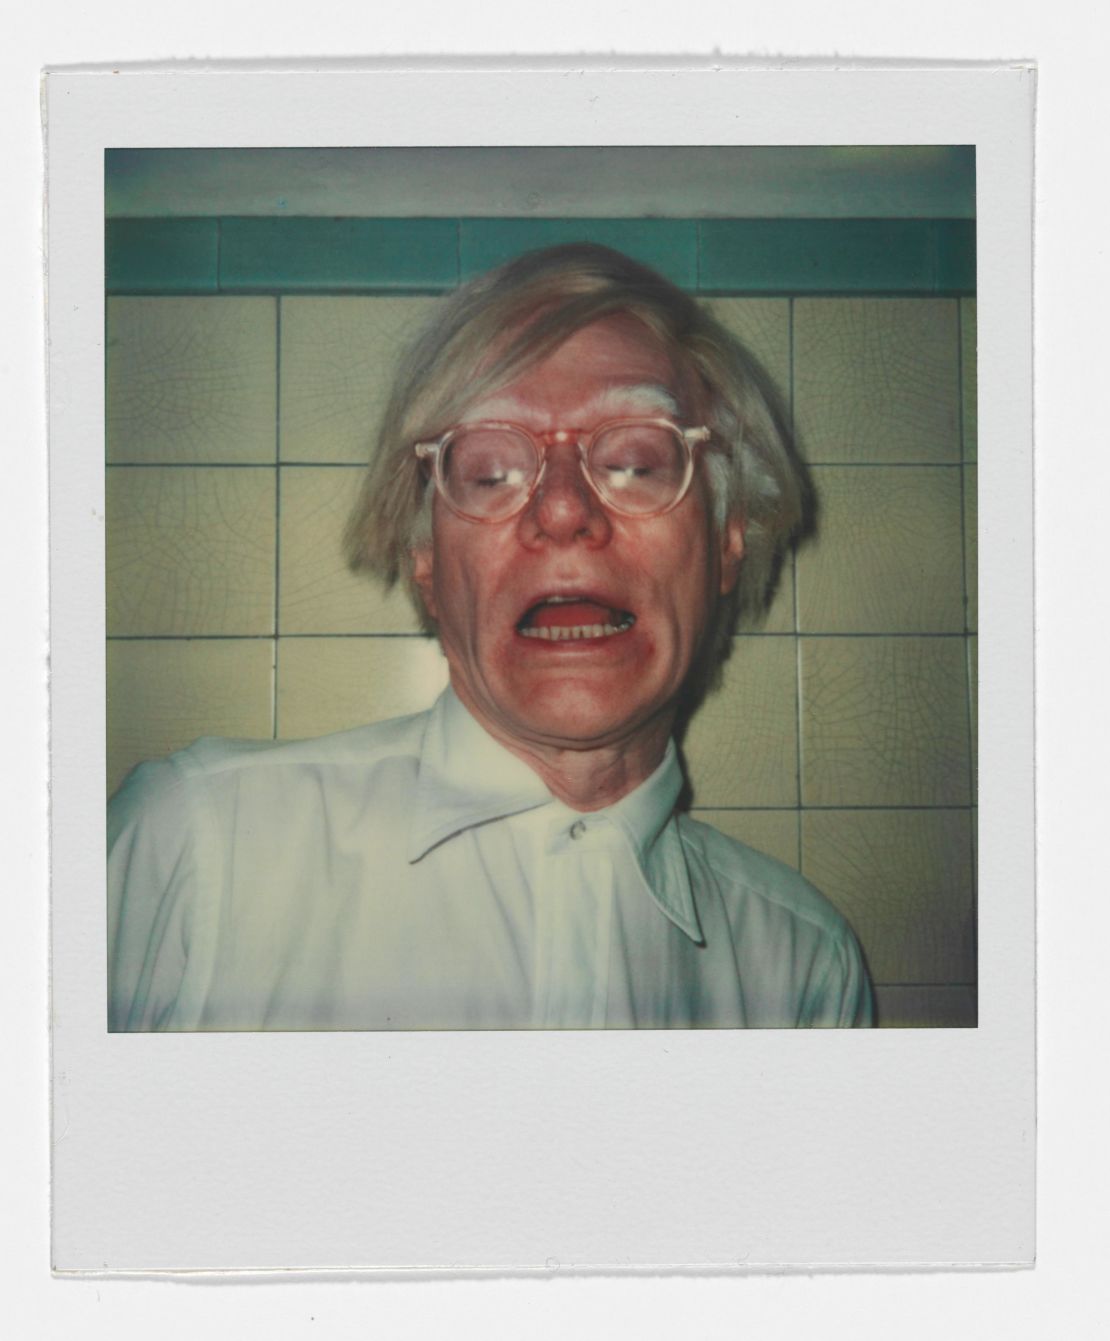 "Andy Sneezing" (1978) by Andy Warhol